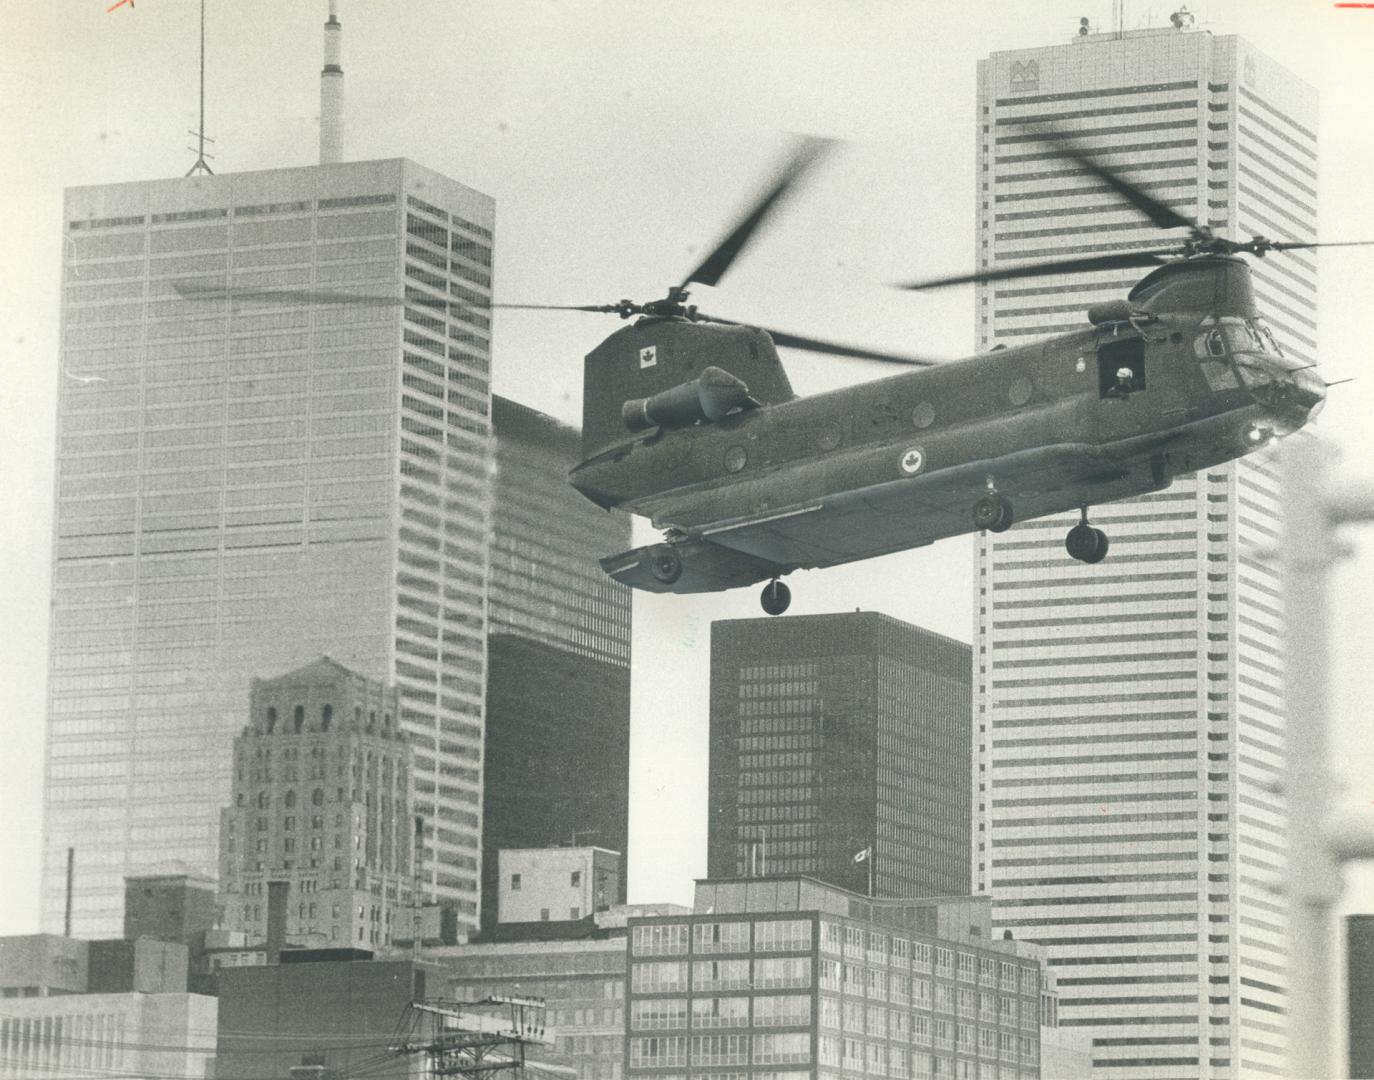 Swoosh. One of two Chinook helicopters cuts quite a swath over Metro's skies yesterday on its way to Moss Park Armouries. The choppers picked up 100 m(...)